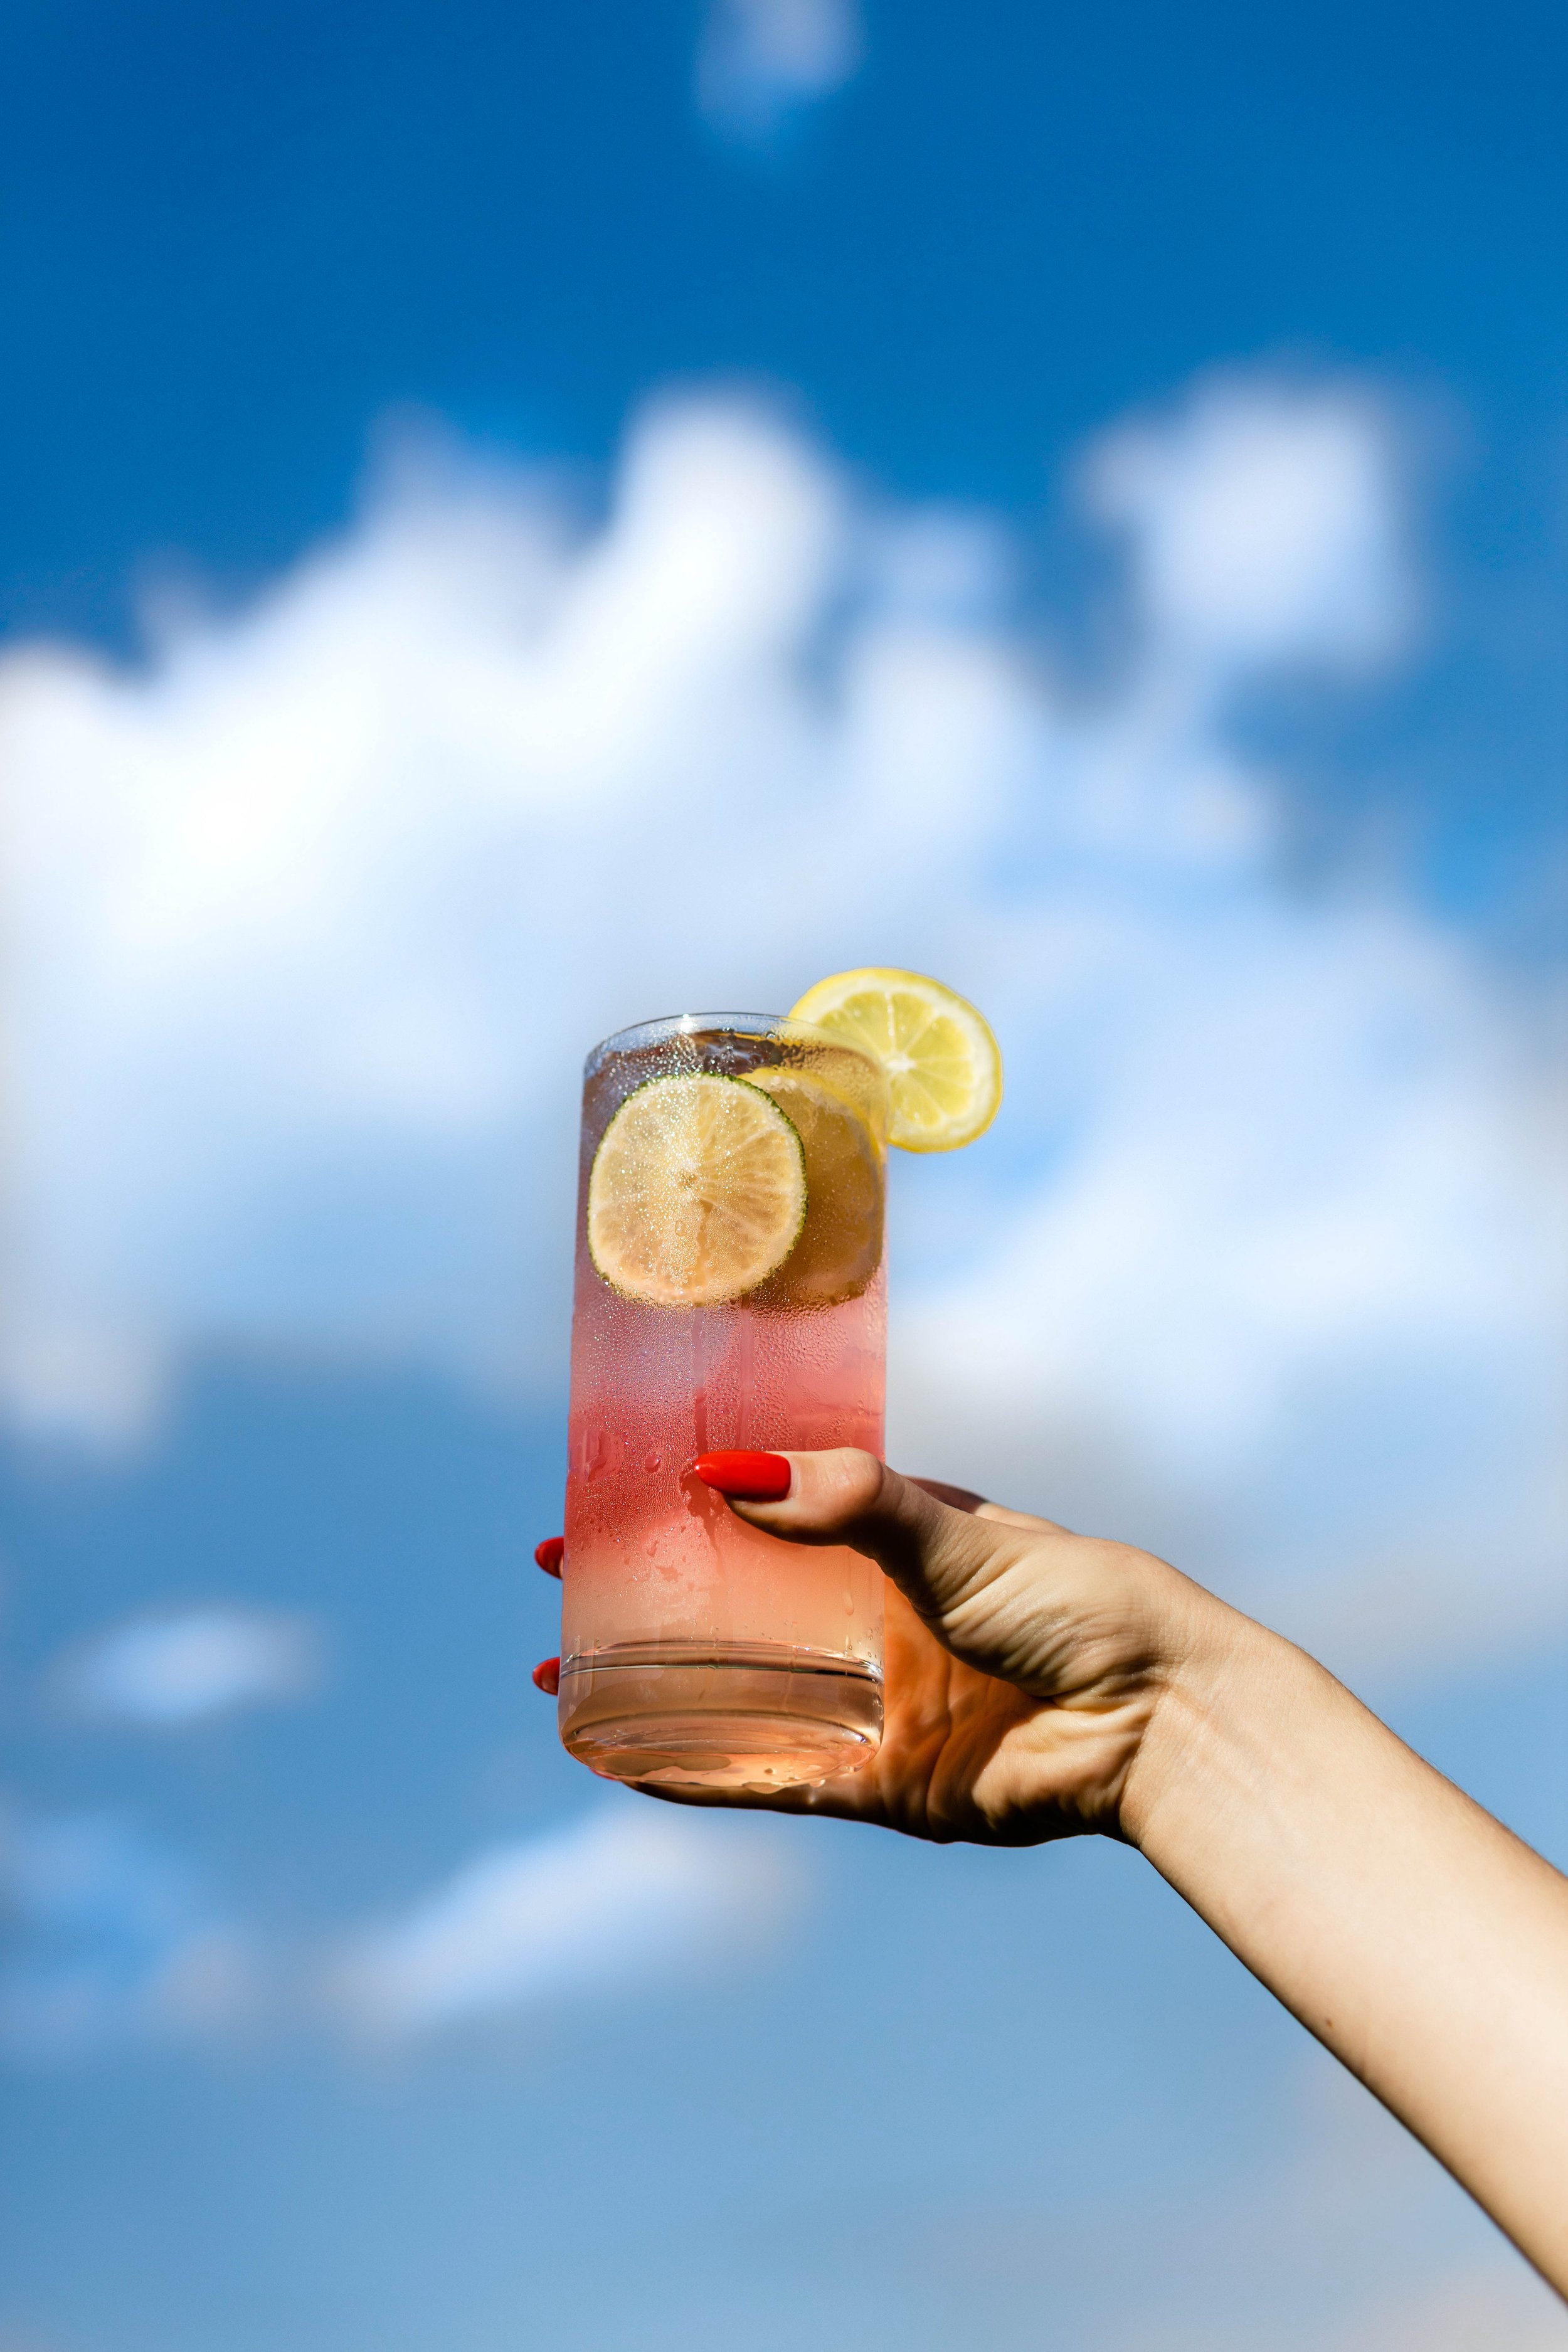  Fruity drink held up to the cloudy blue sky. 